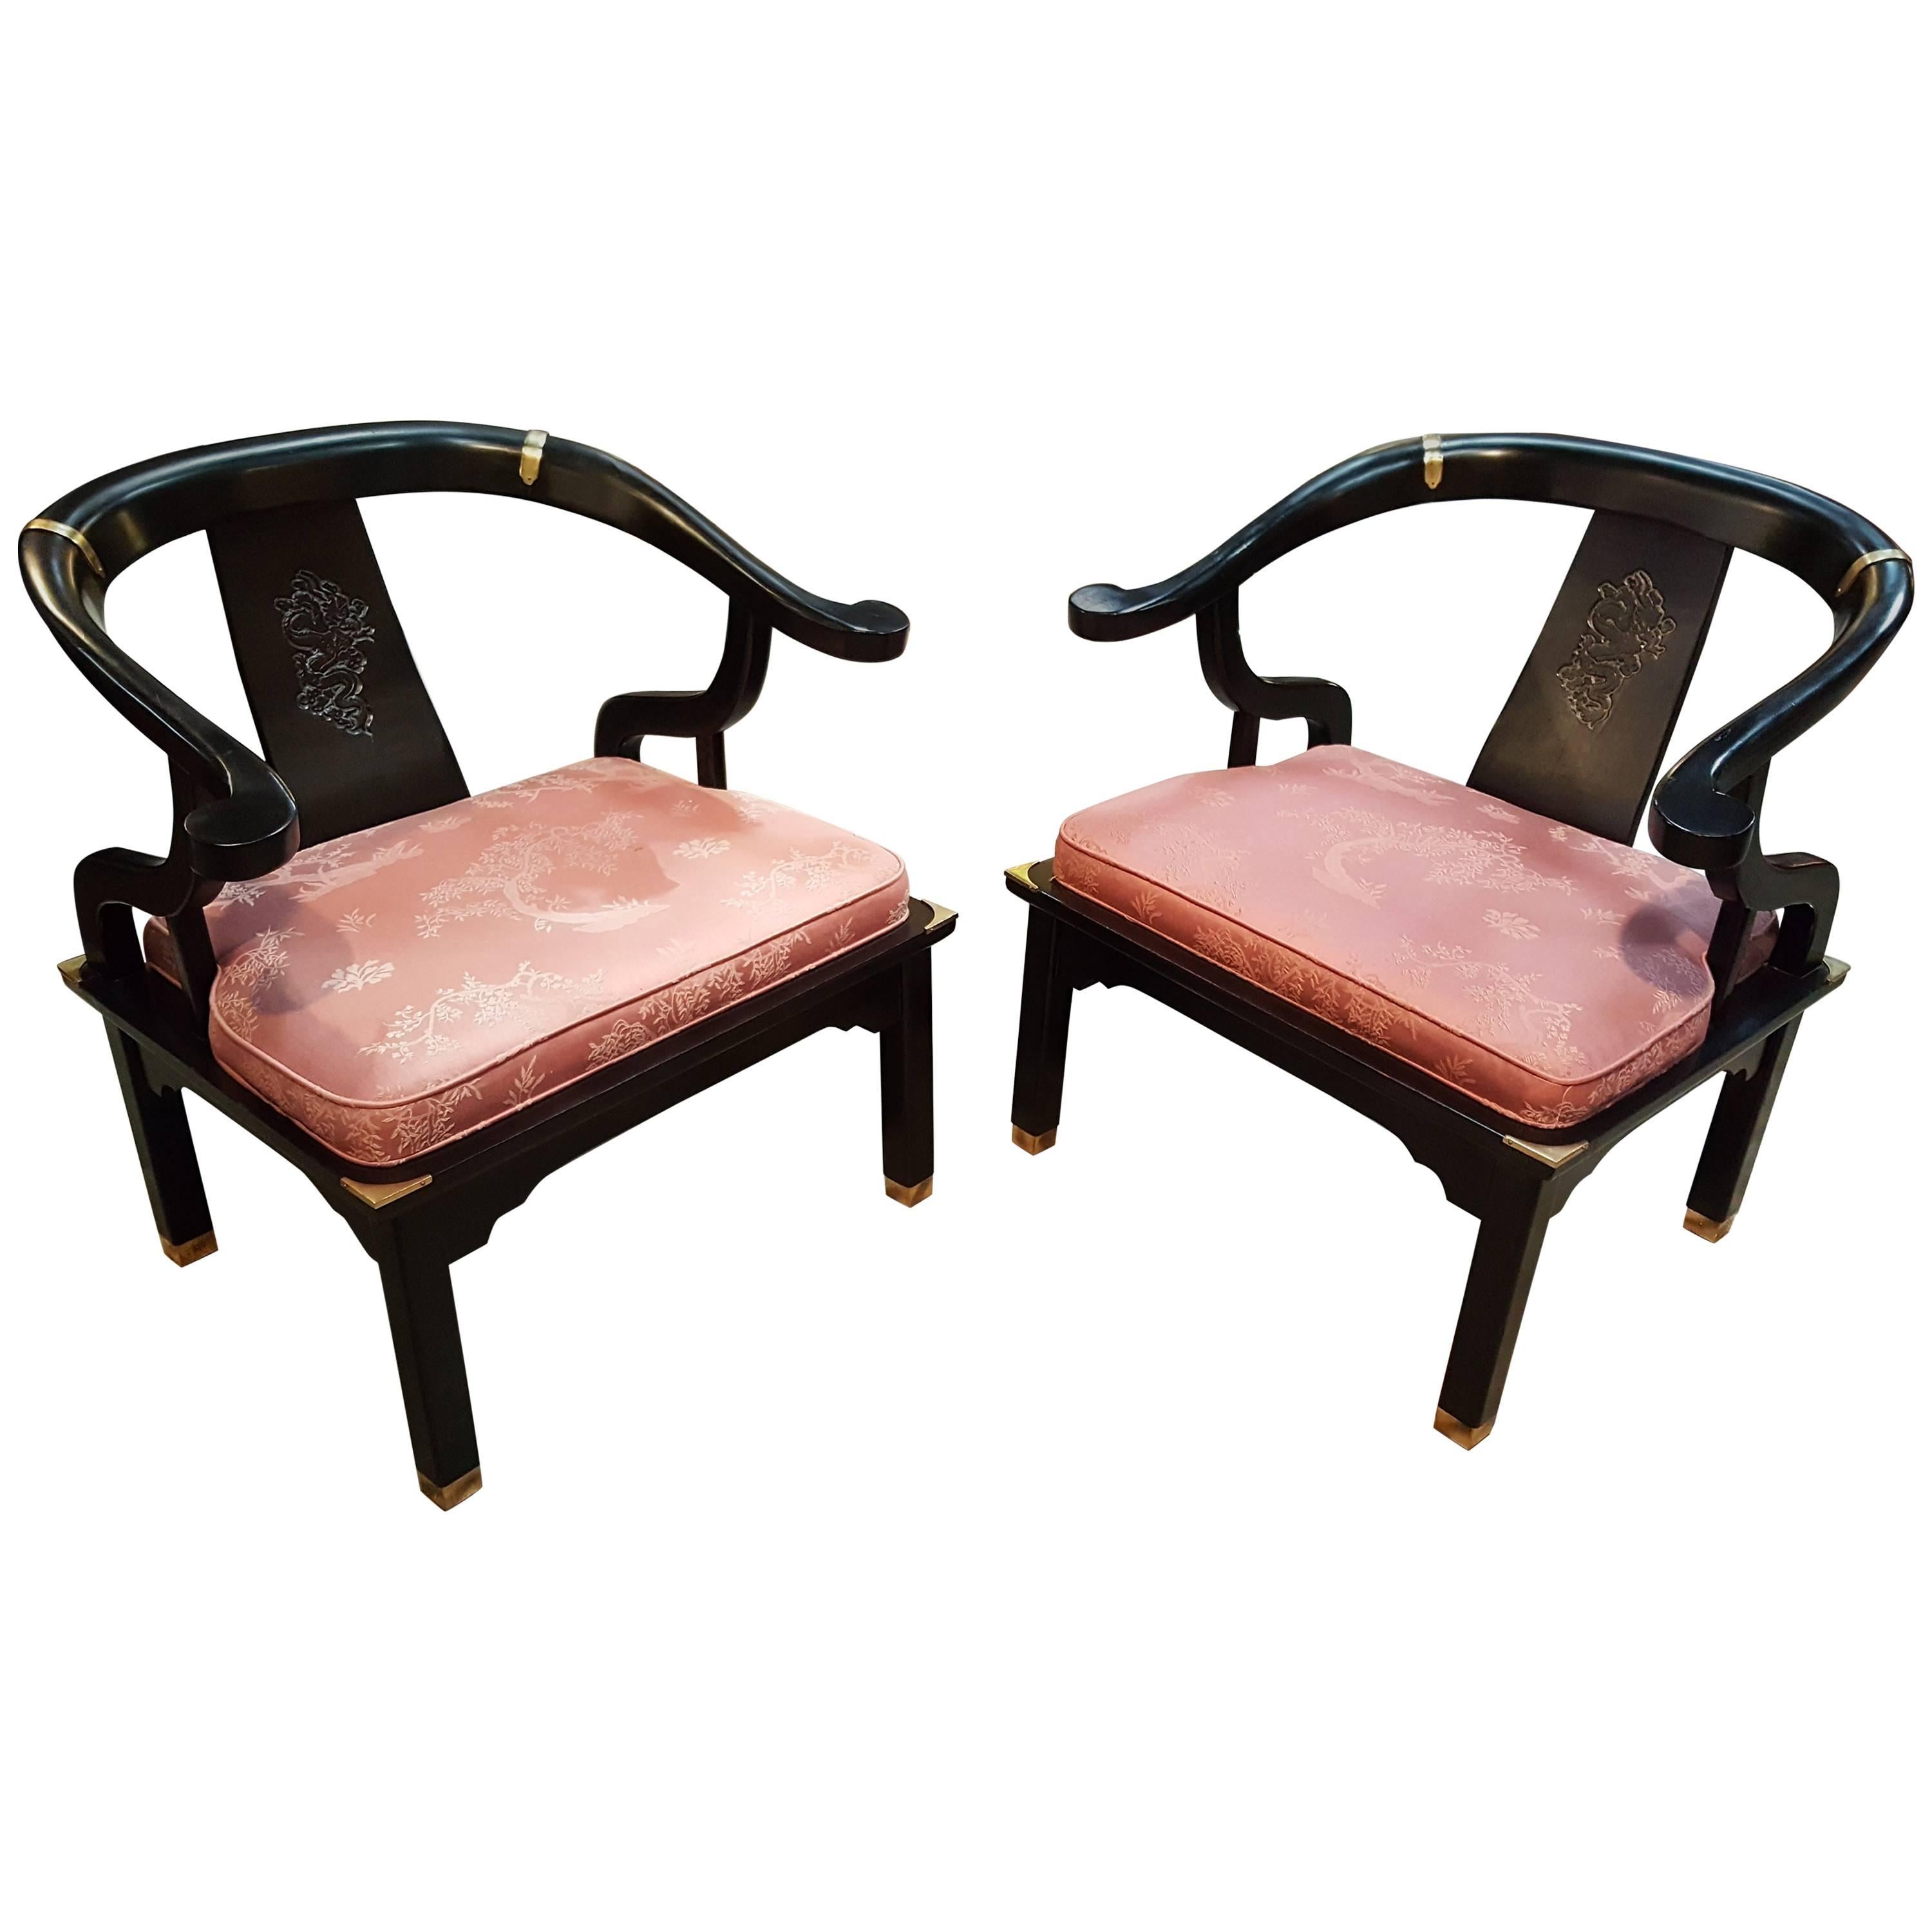 Black Lacquer Ming Style Chairs manner of James Mont